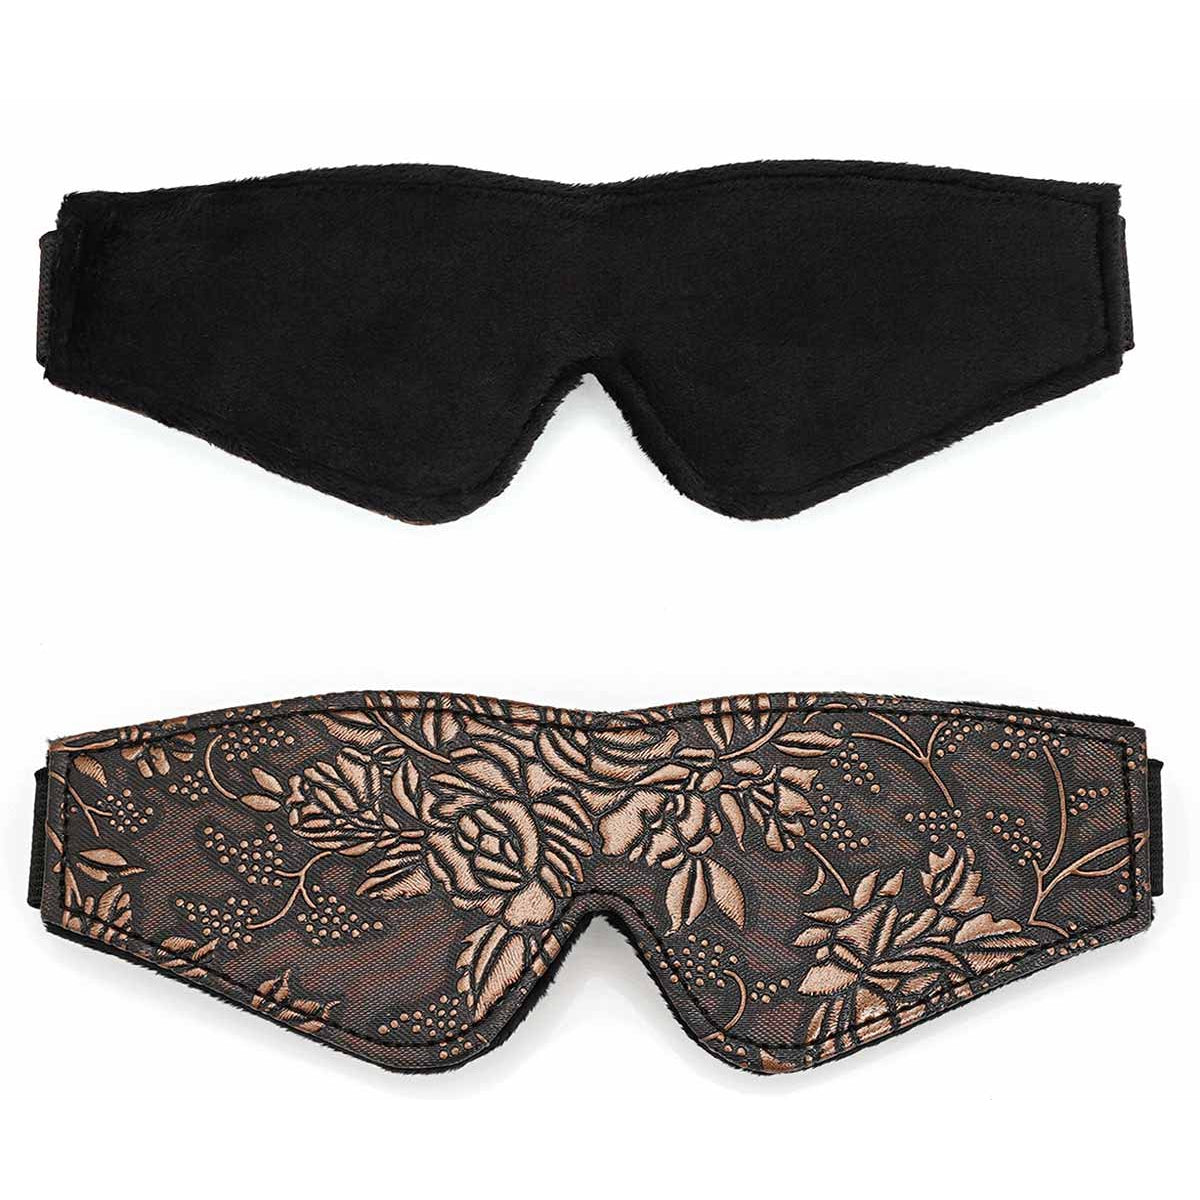 Spartacus Faux Fur Lining Blindfold